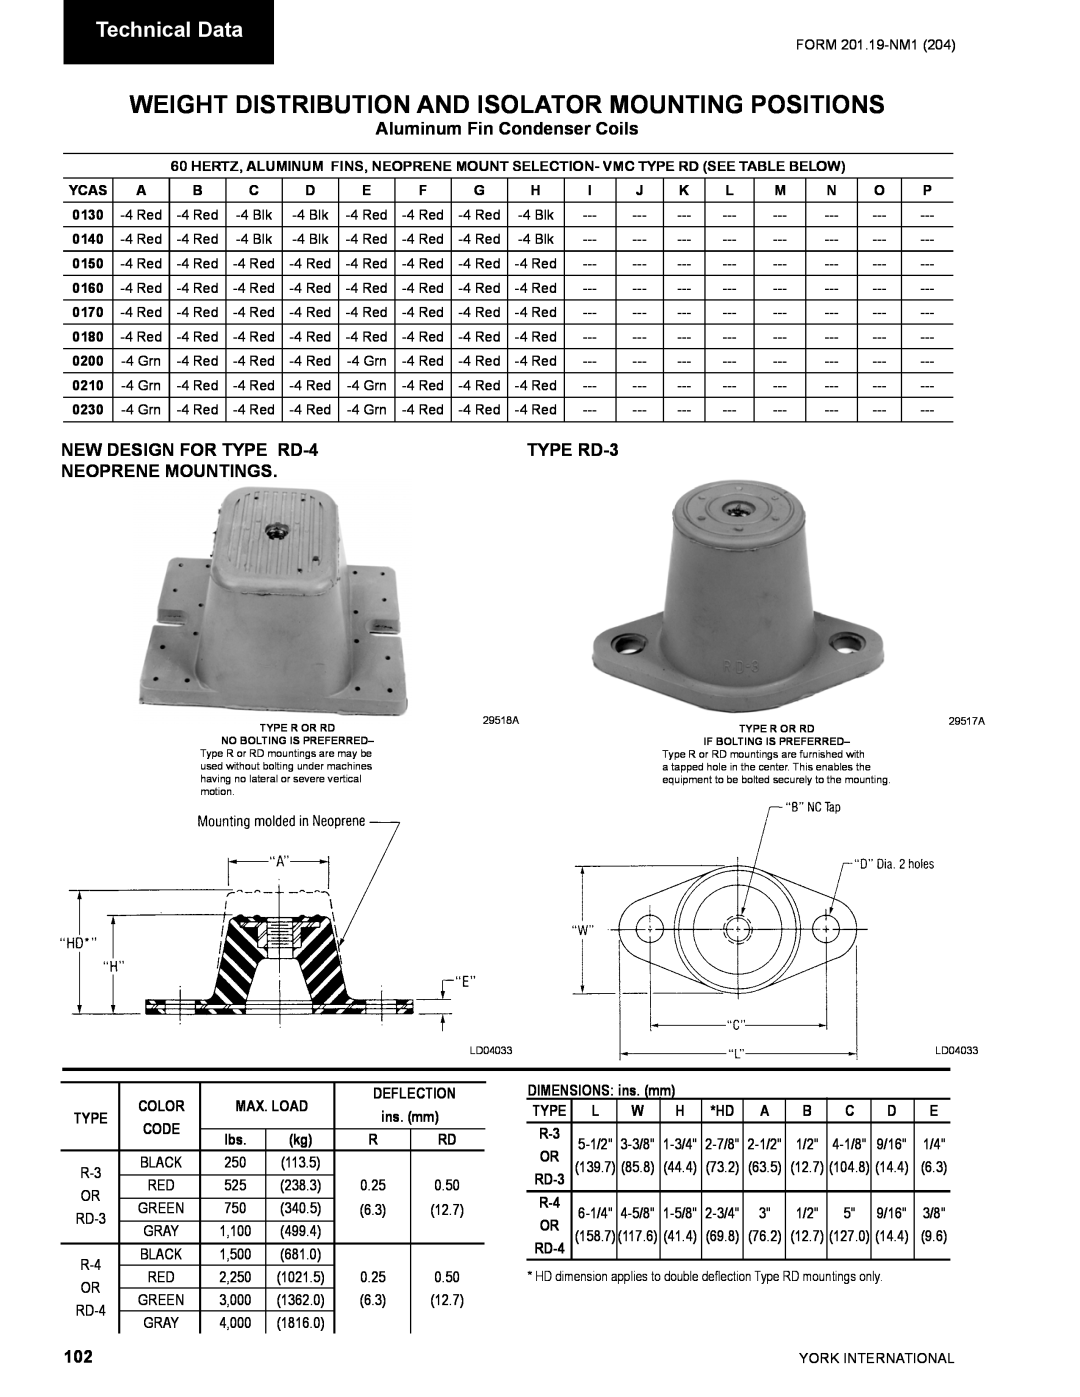 York YCAS0130 Weight Distribution And Isolator Mounting Positions, Technical Data, Aluminum Fin Condenser Coils, TYPE RD-3 